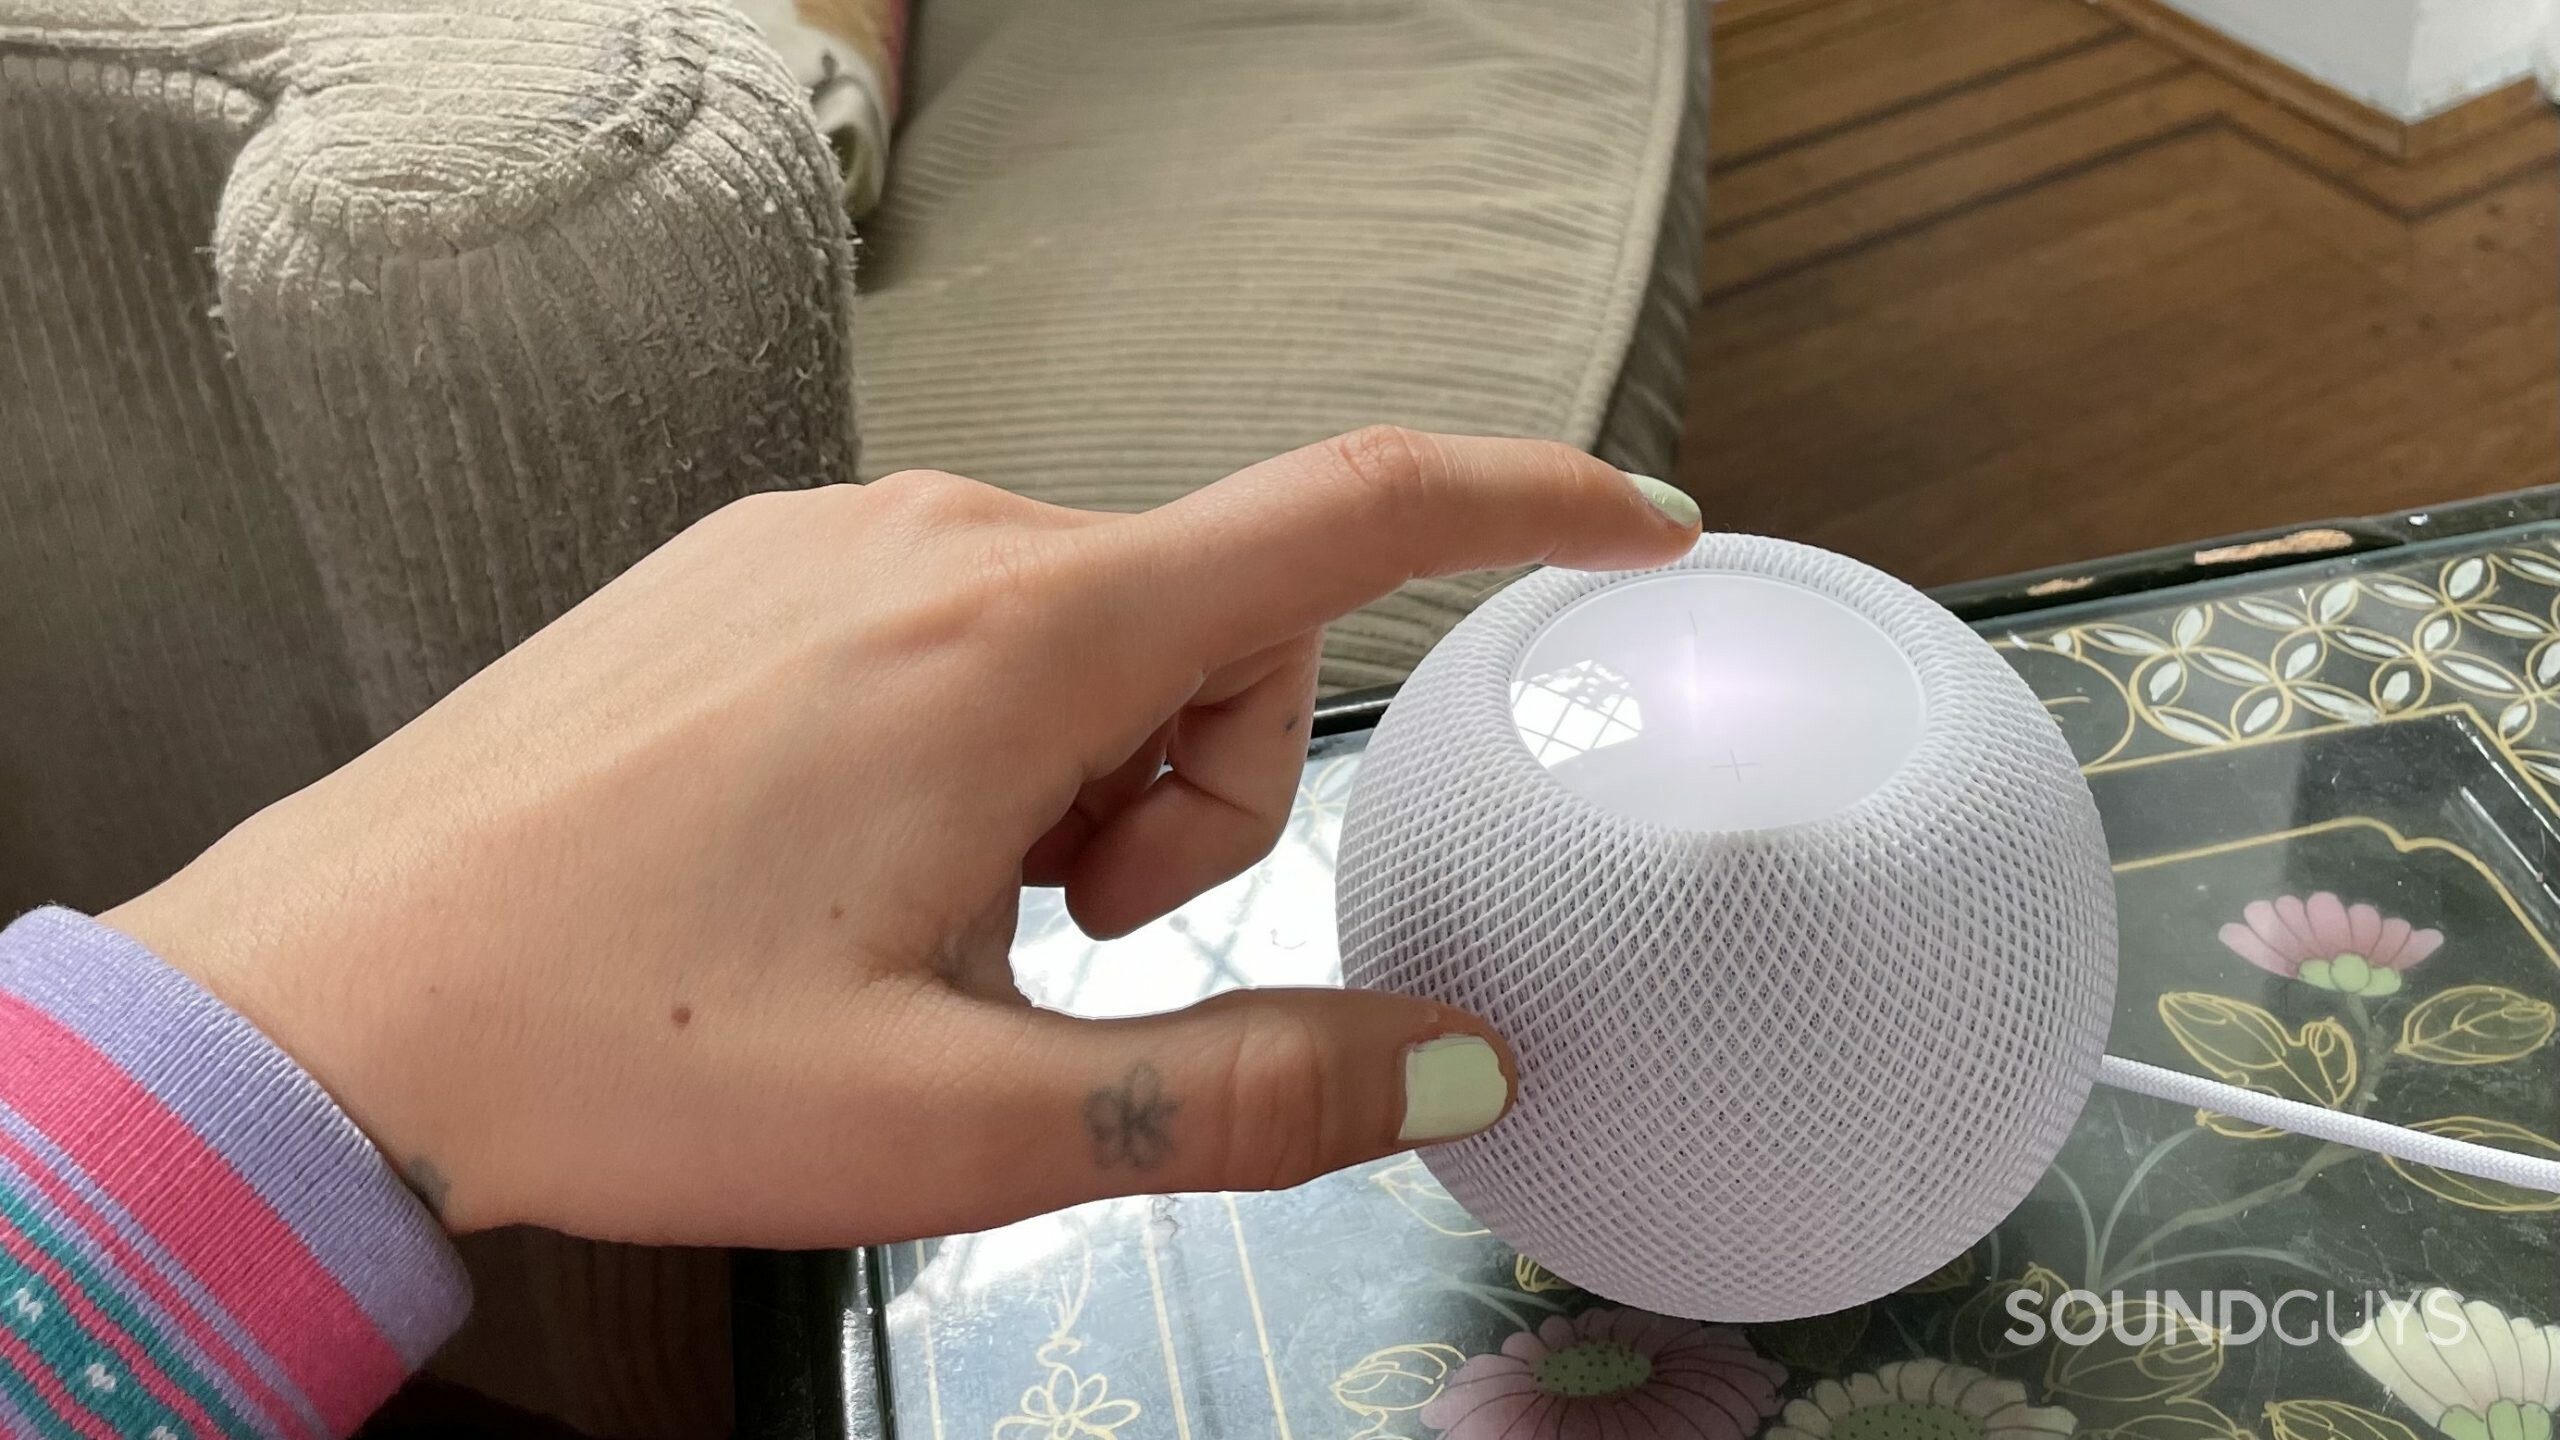 Apple introduces HomePod mini: A powerful smart speaker with amazing sound  - Apple